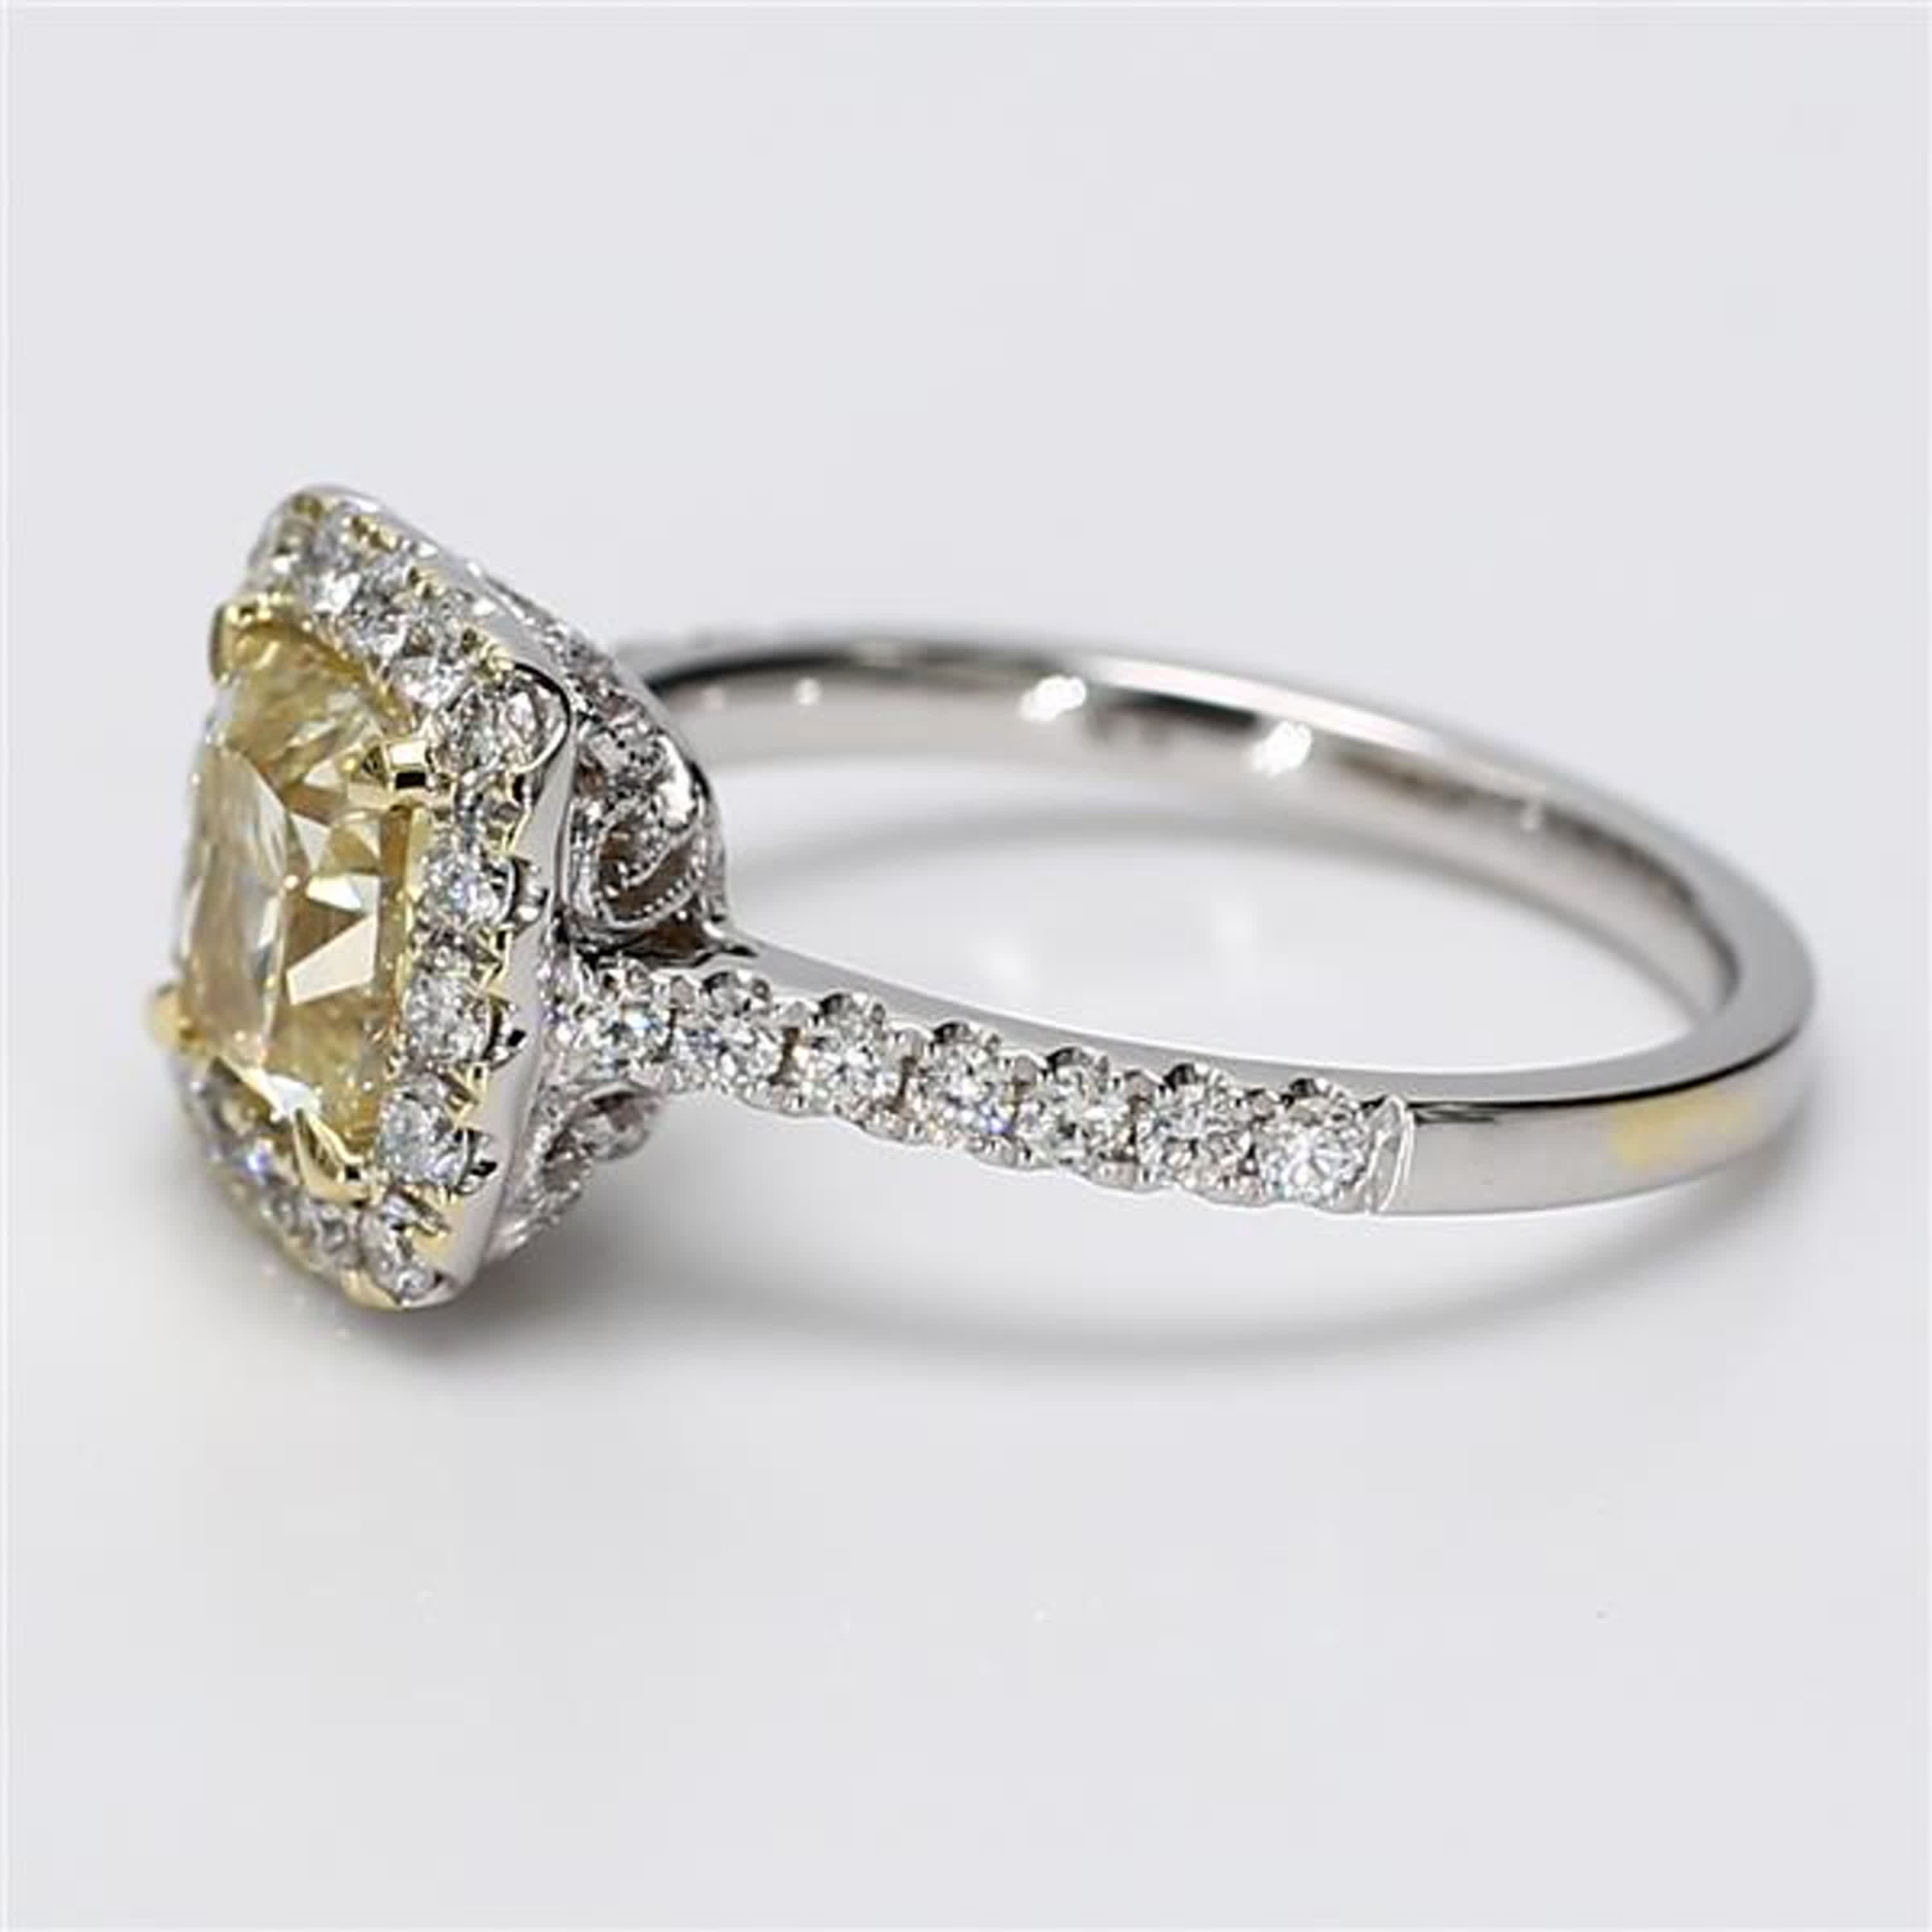 GIA Certified Natural Yellow Cushion and White Diamond 2.18 Carat TW Gold Ring